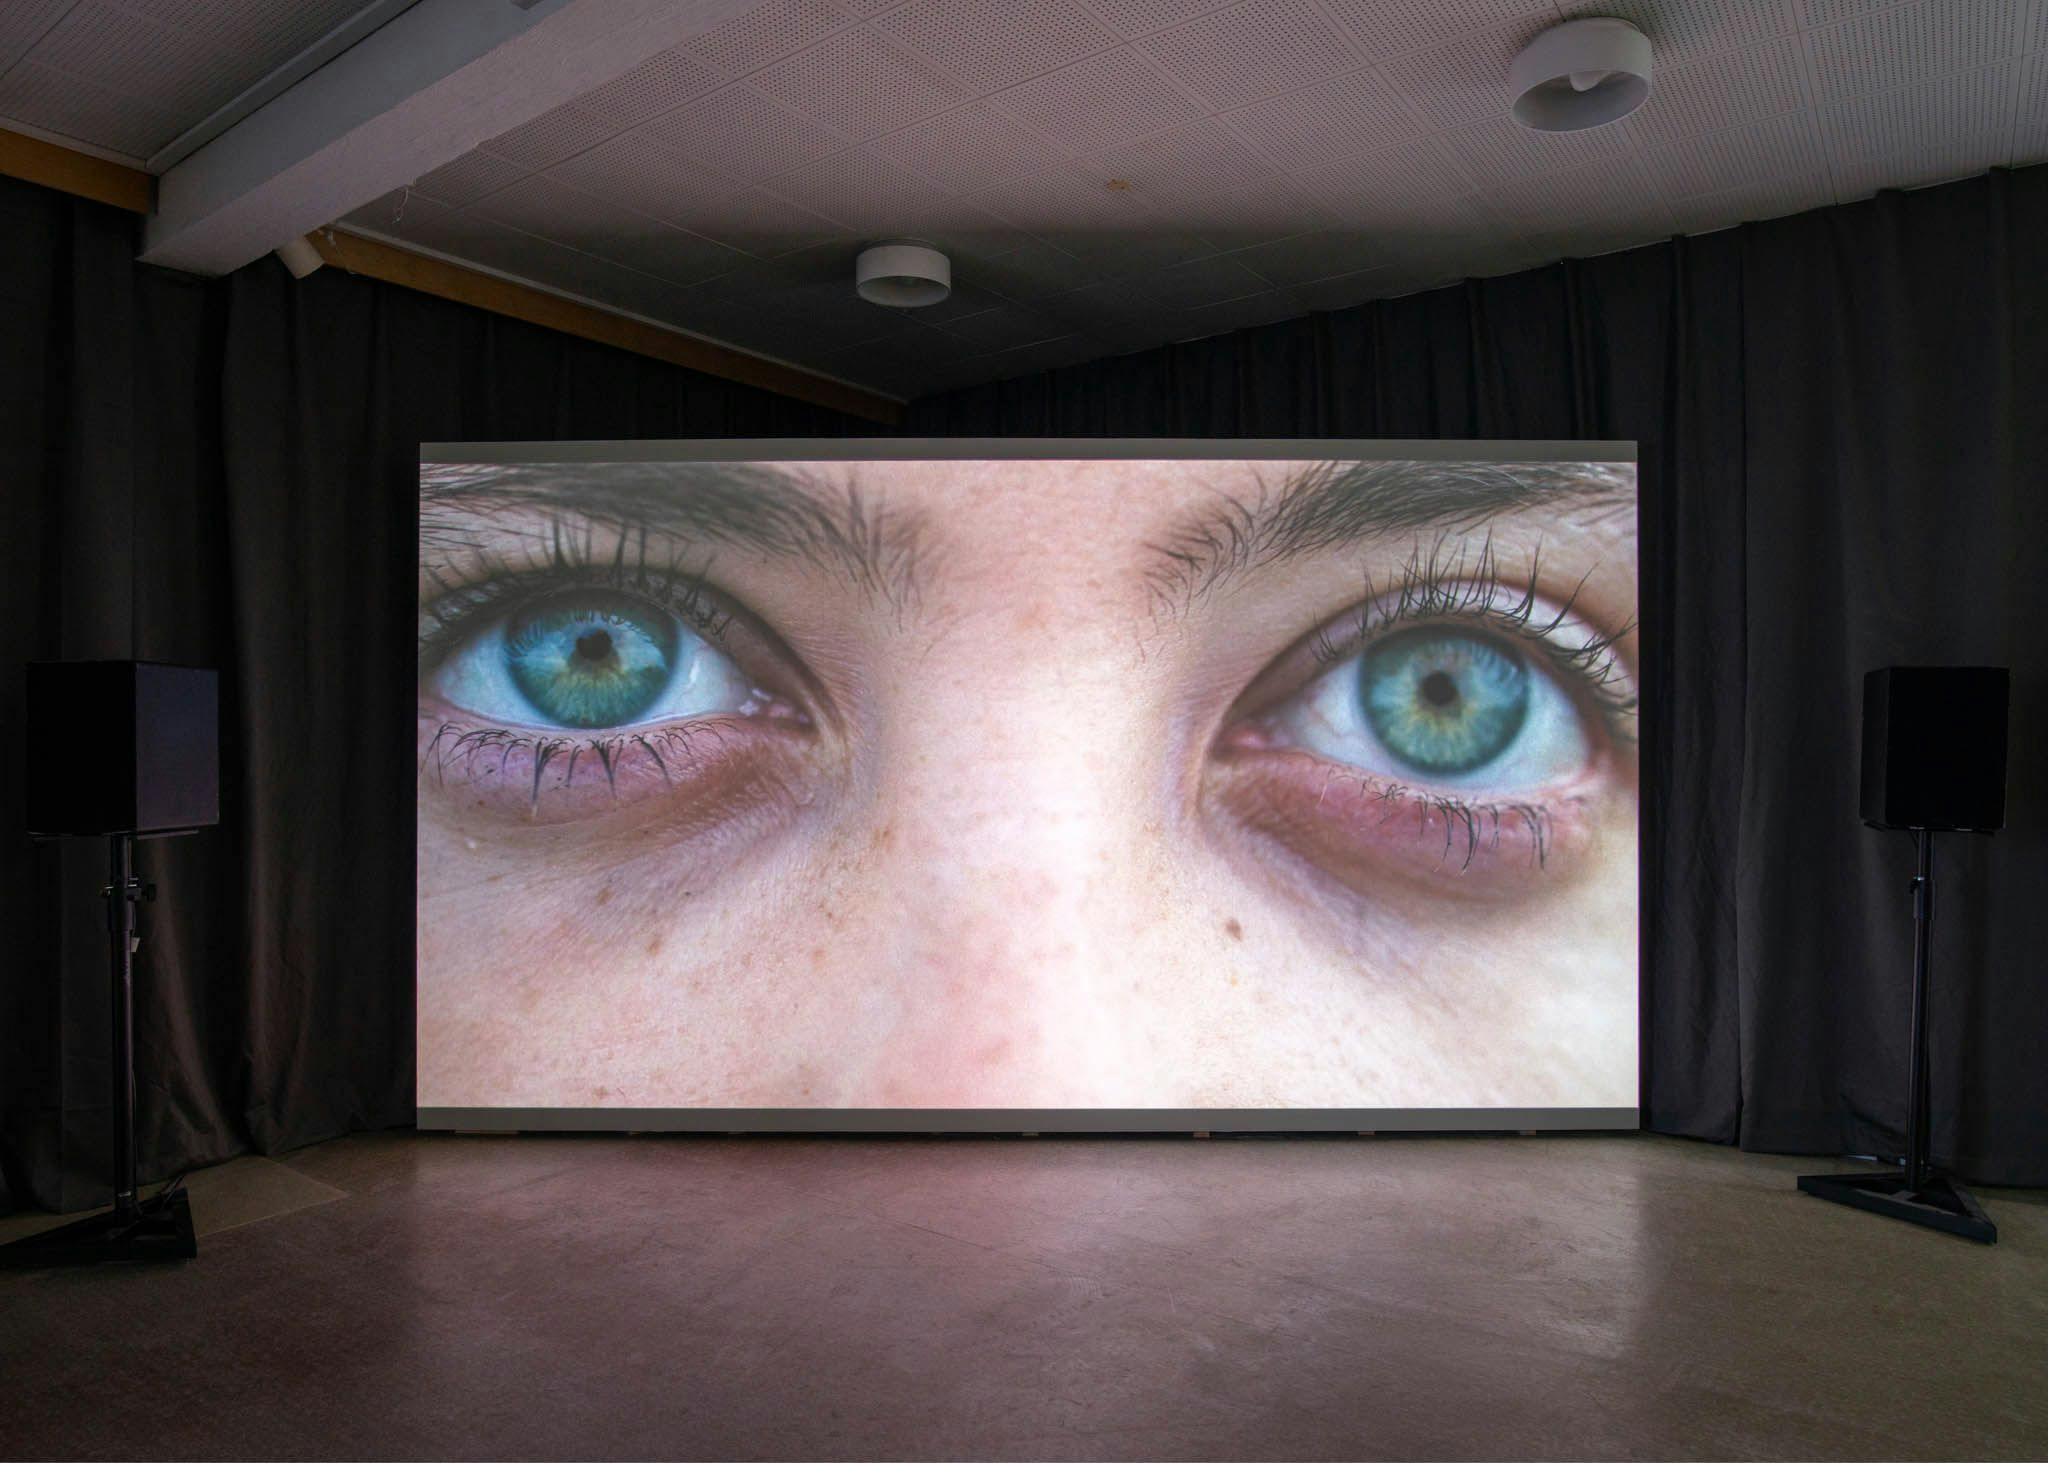 Two green eyes stare out from a projector screen